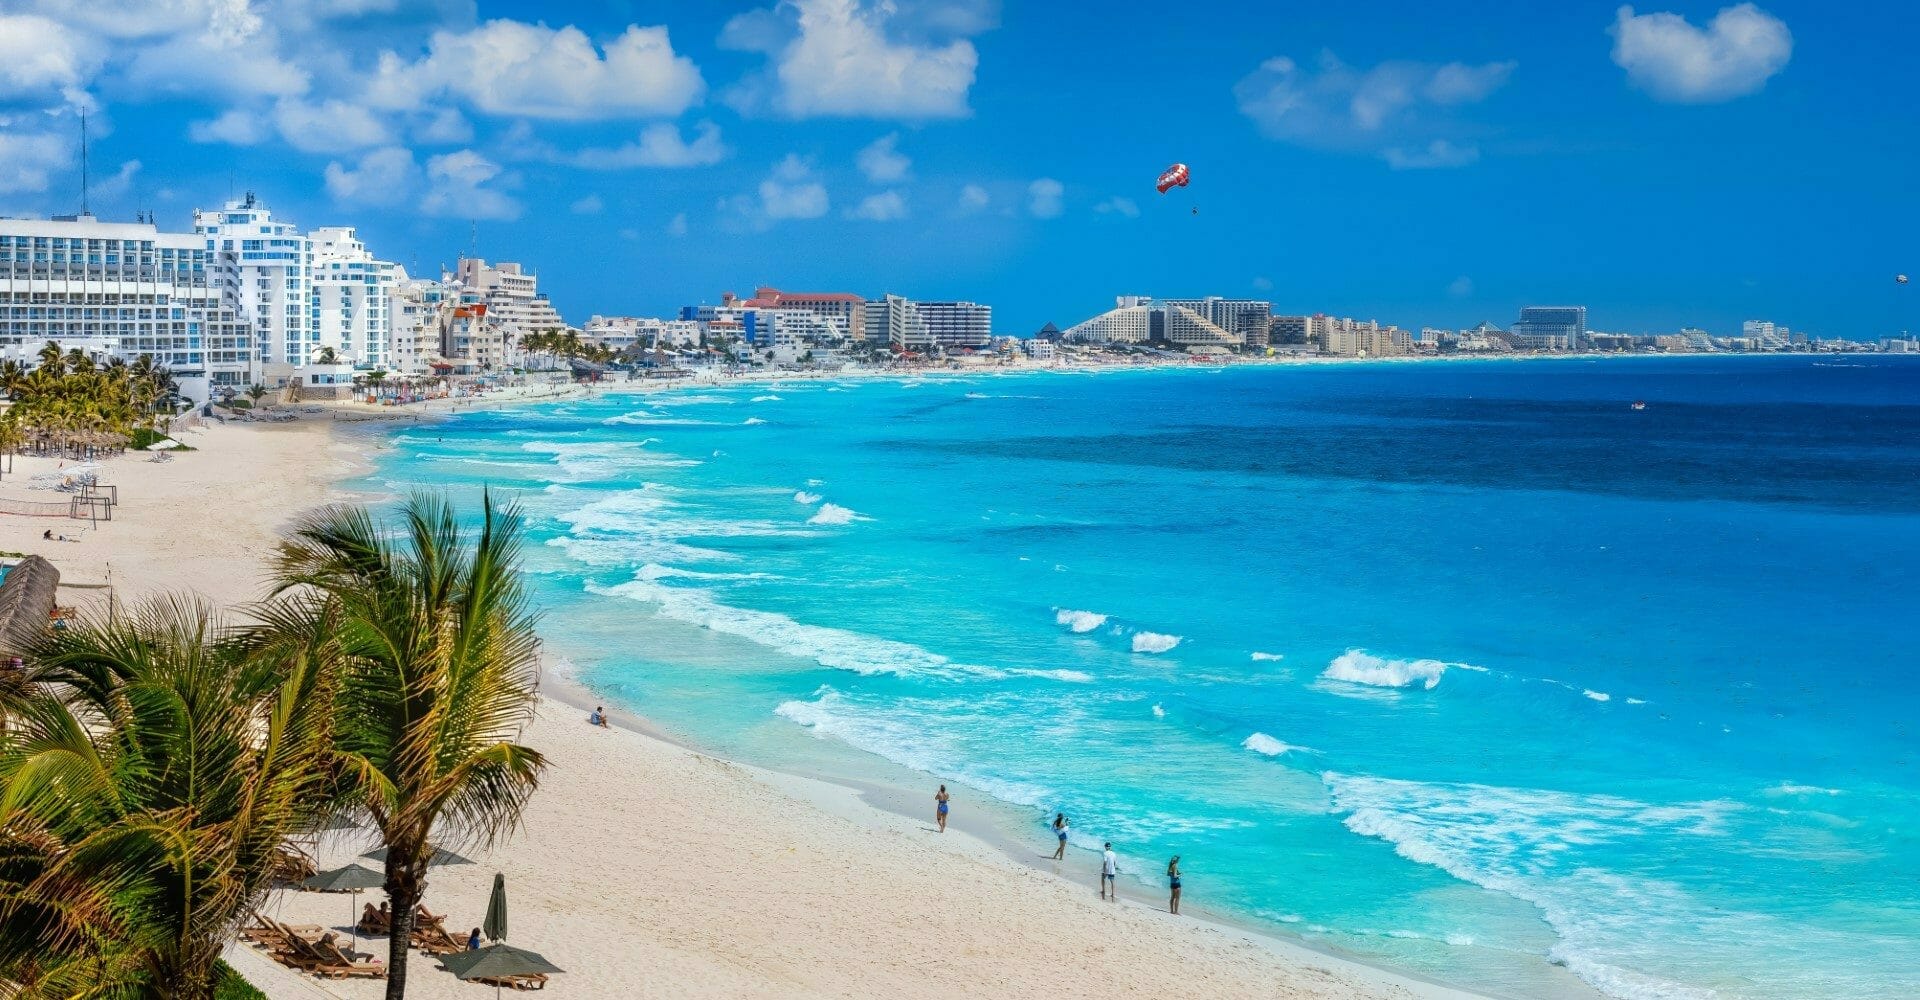 Is Cancun Safe for Travel?